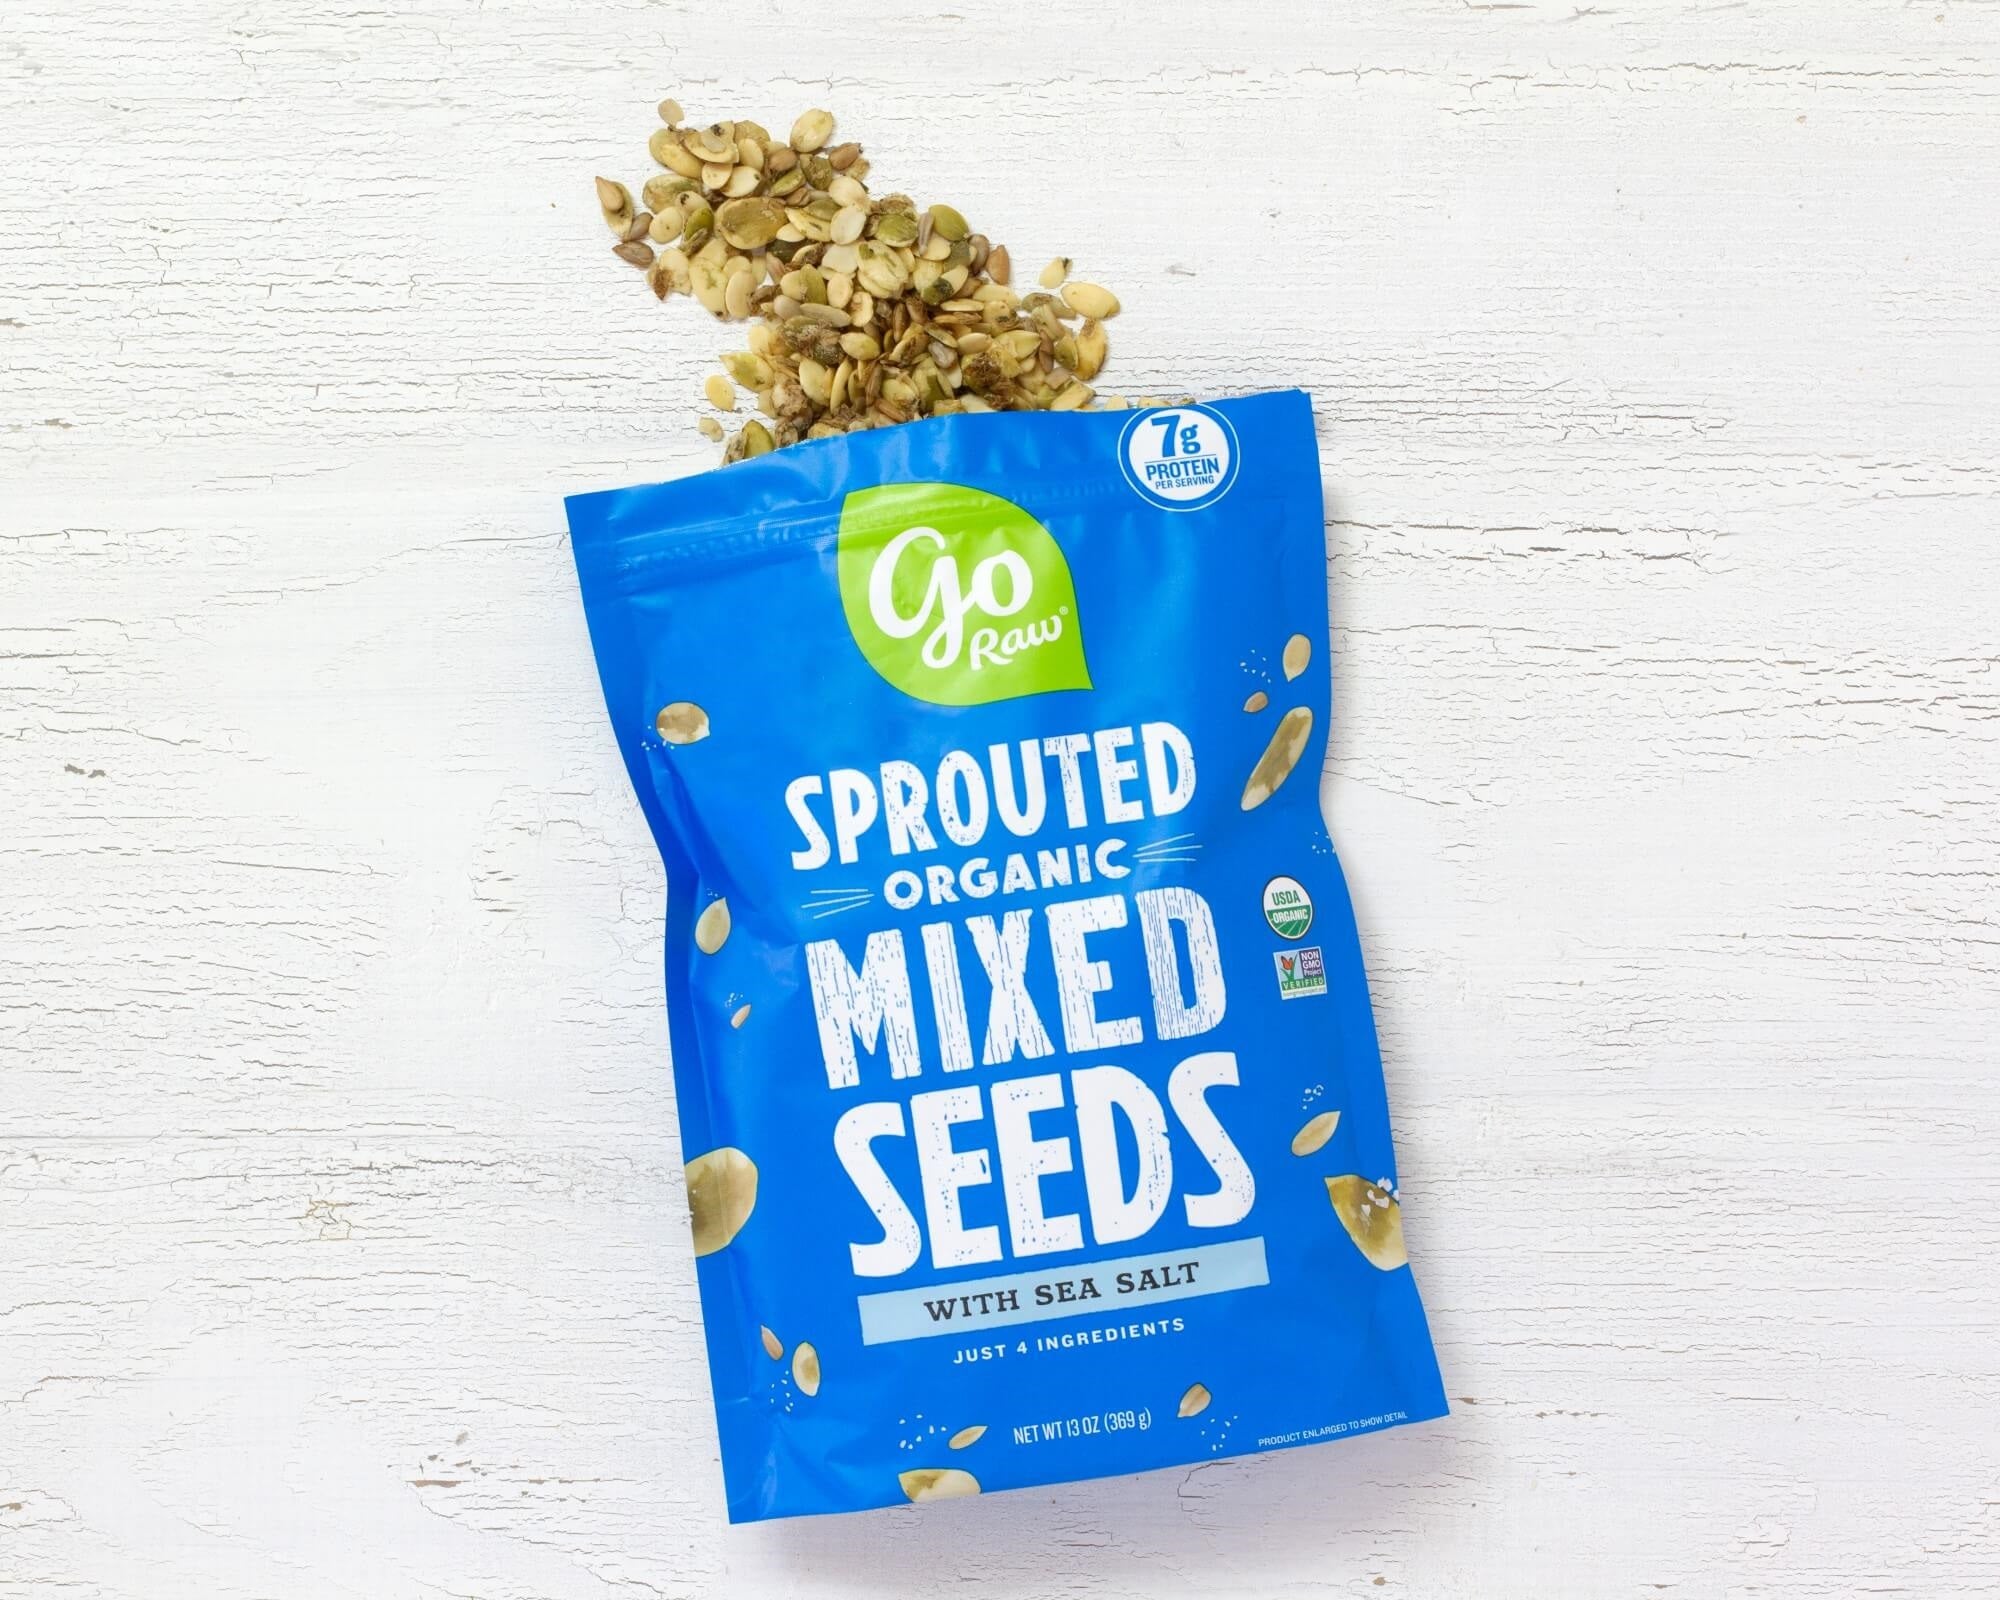 Go Raw Sprouted Mixed Seeds are great for gut health